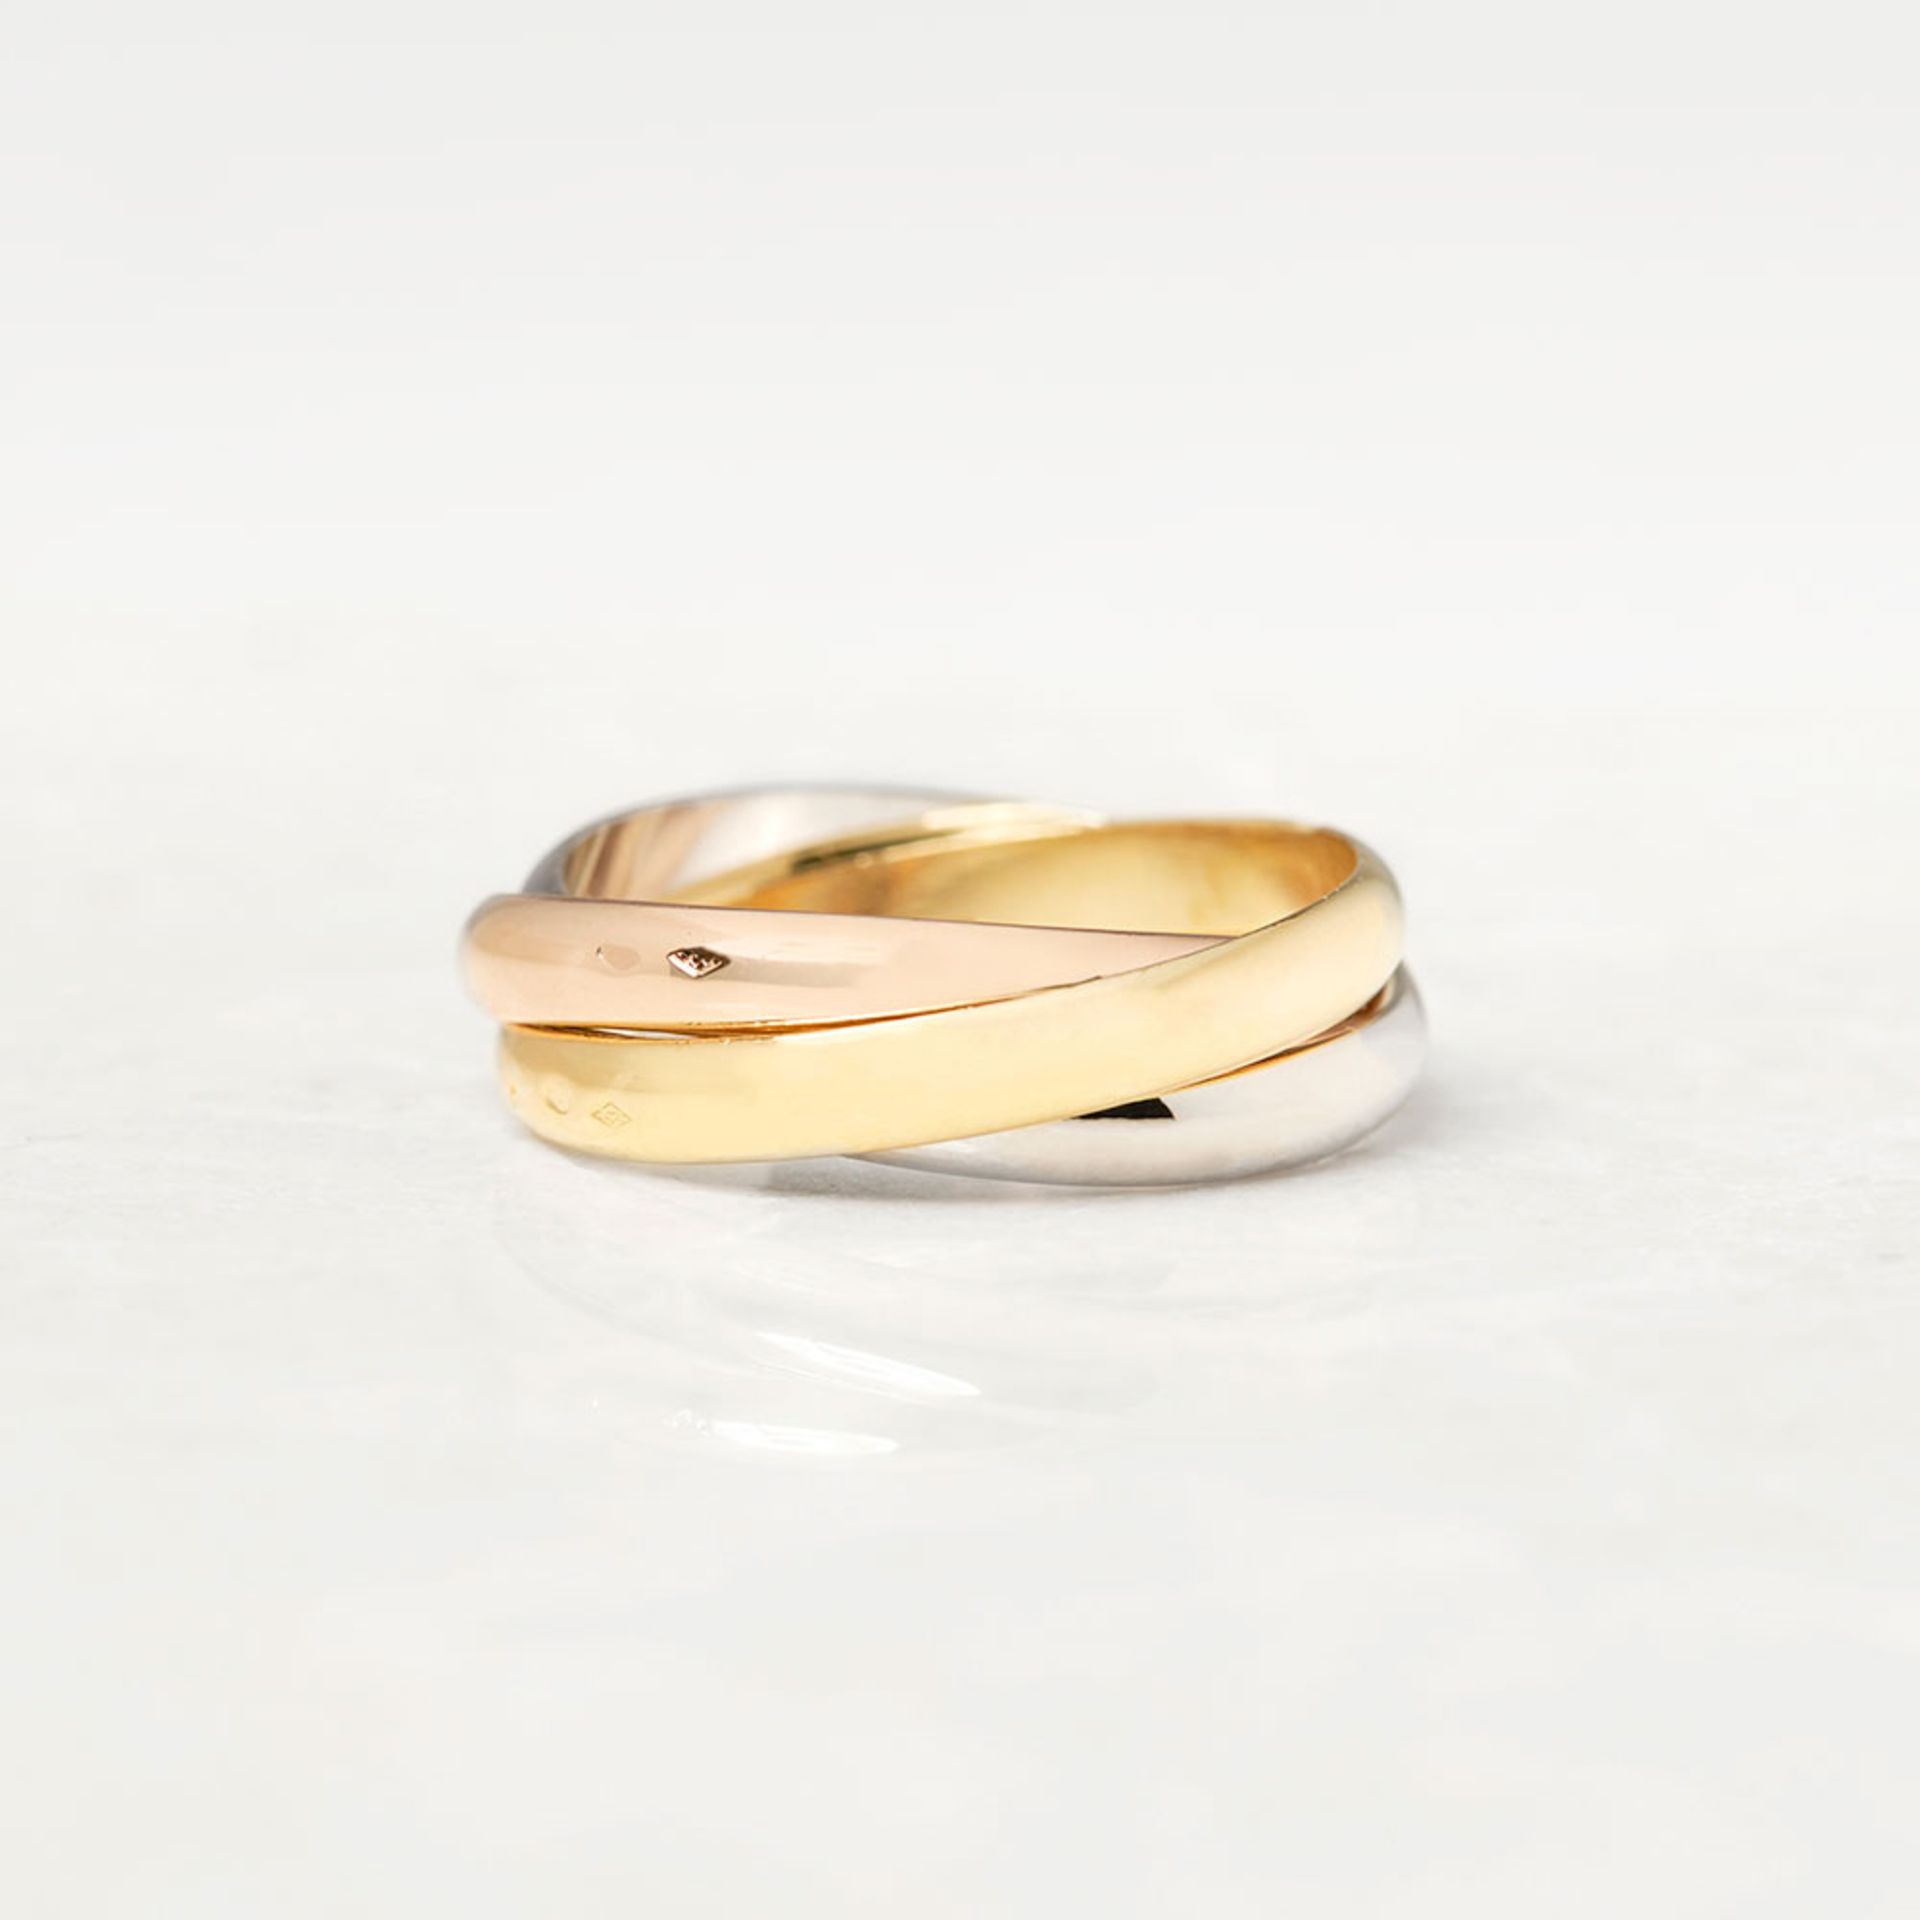 Cartier 18k Yellow, White & Rose Gold Trinity Ring - Image 3 of 6